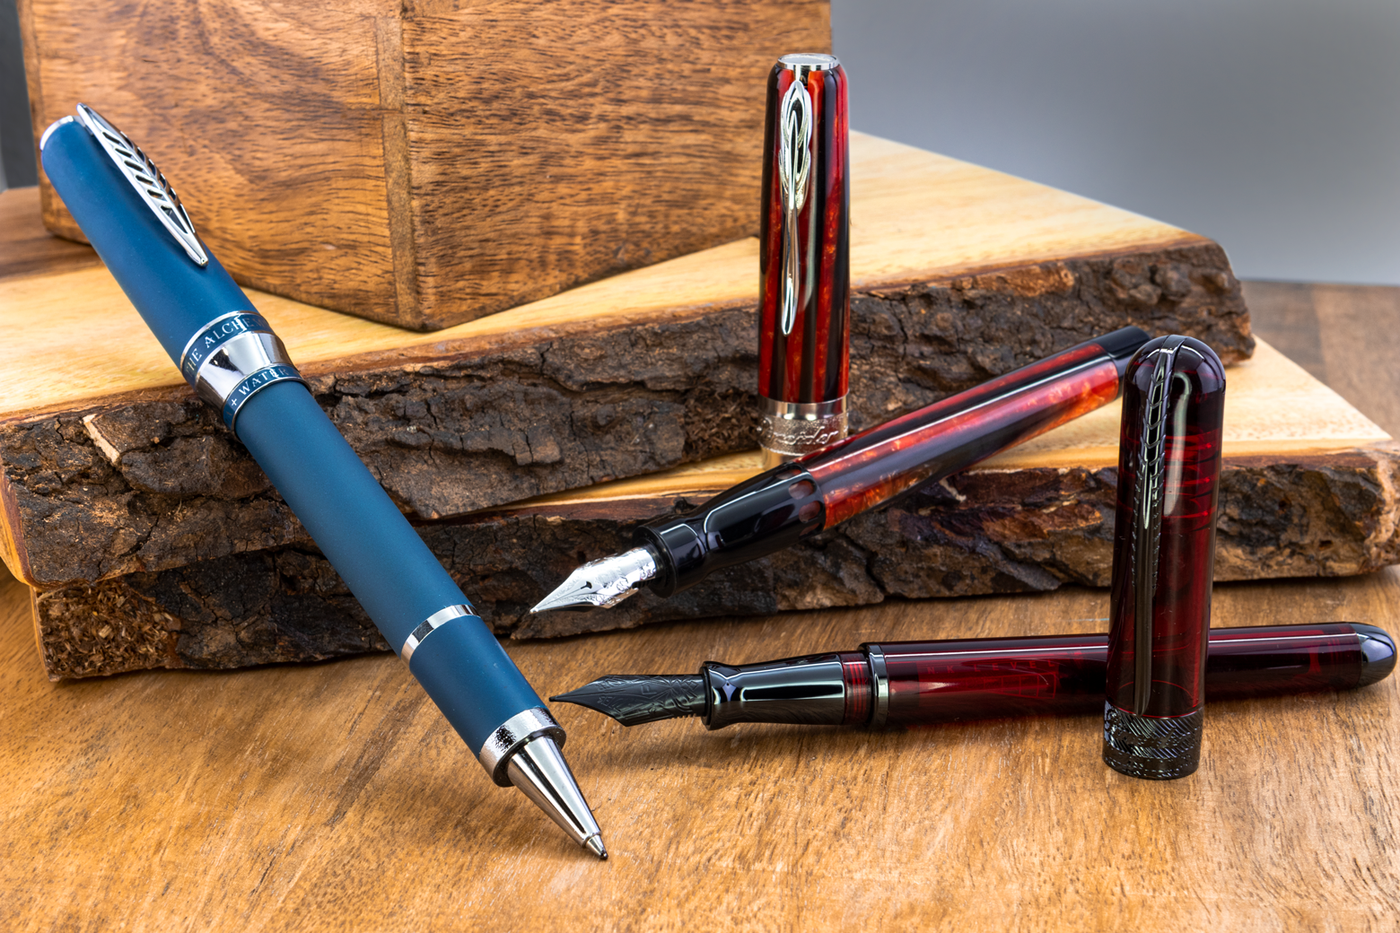 These high quality pens are made from metal and acrylics. These Pens are for wordsmithing, hand lettering, writing, calligraphy, drawing, and art.